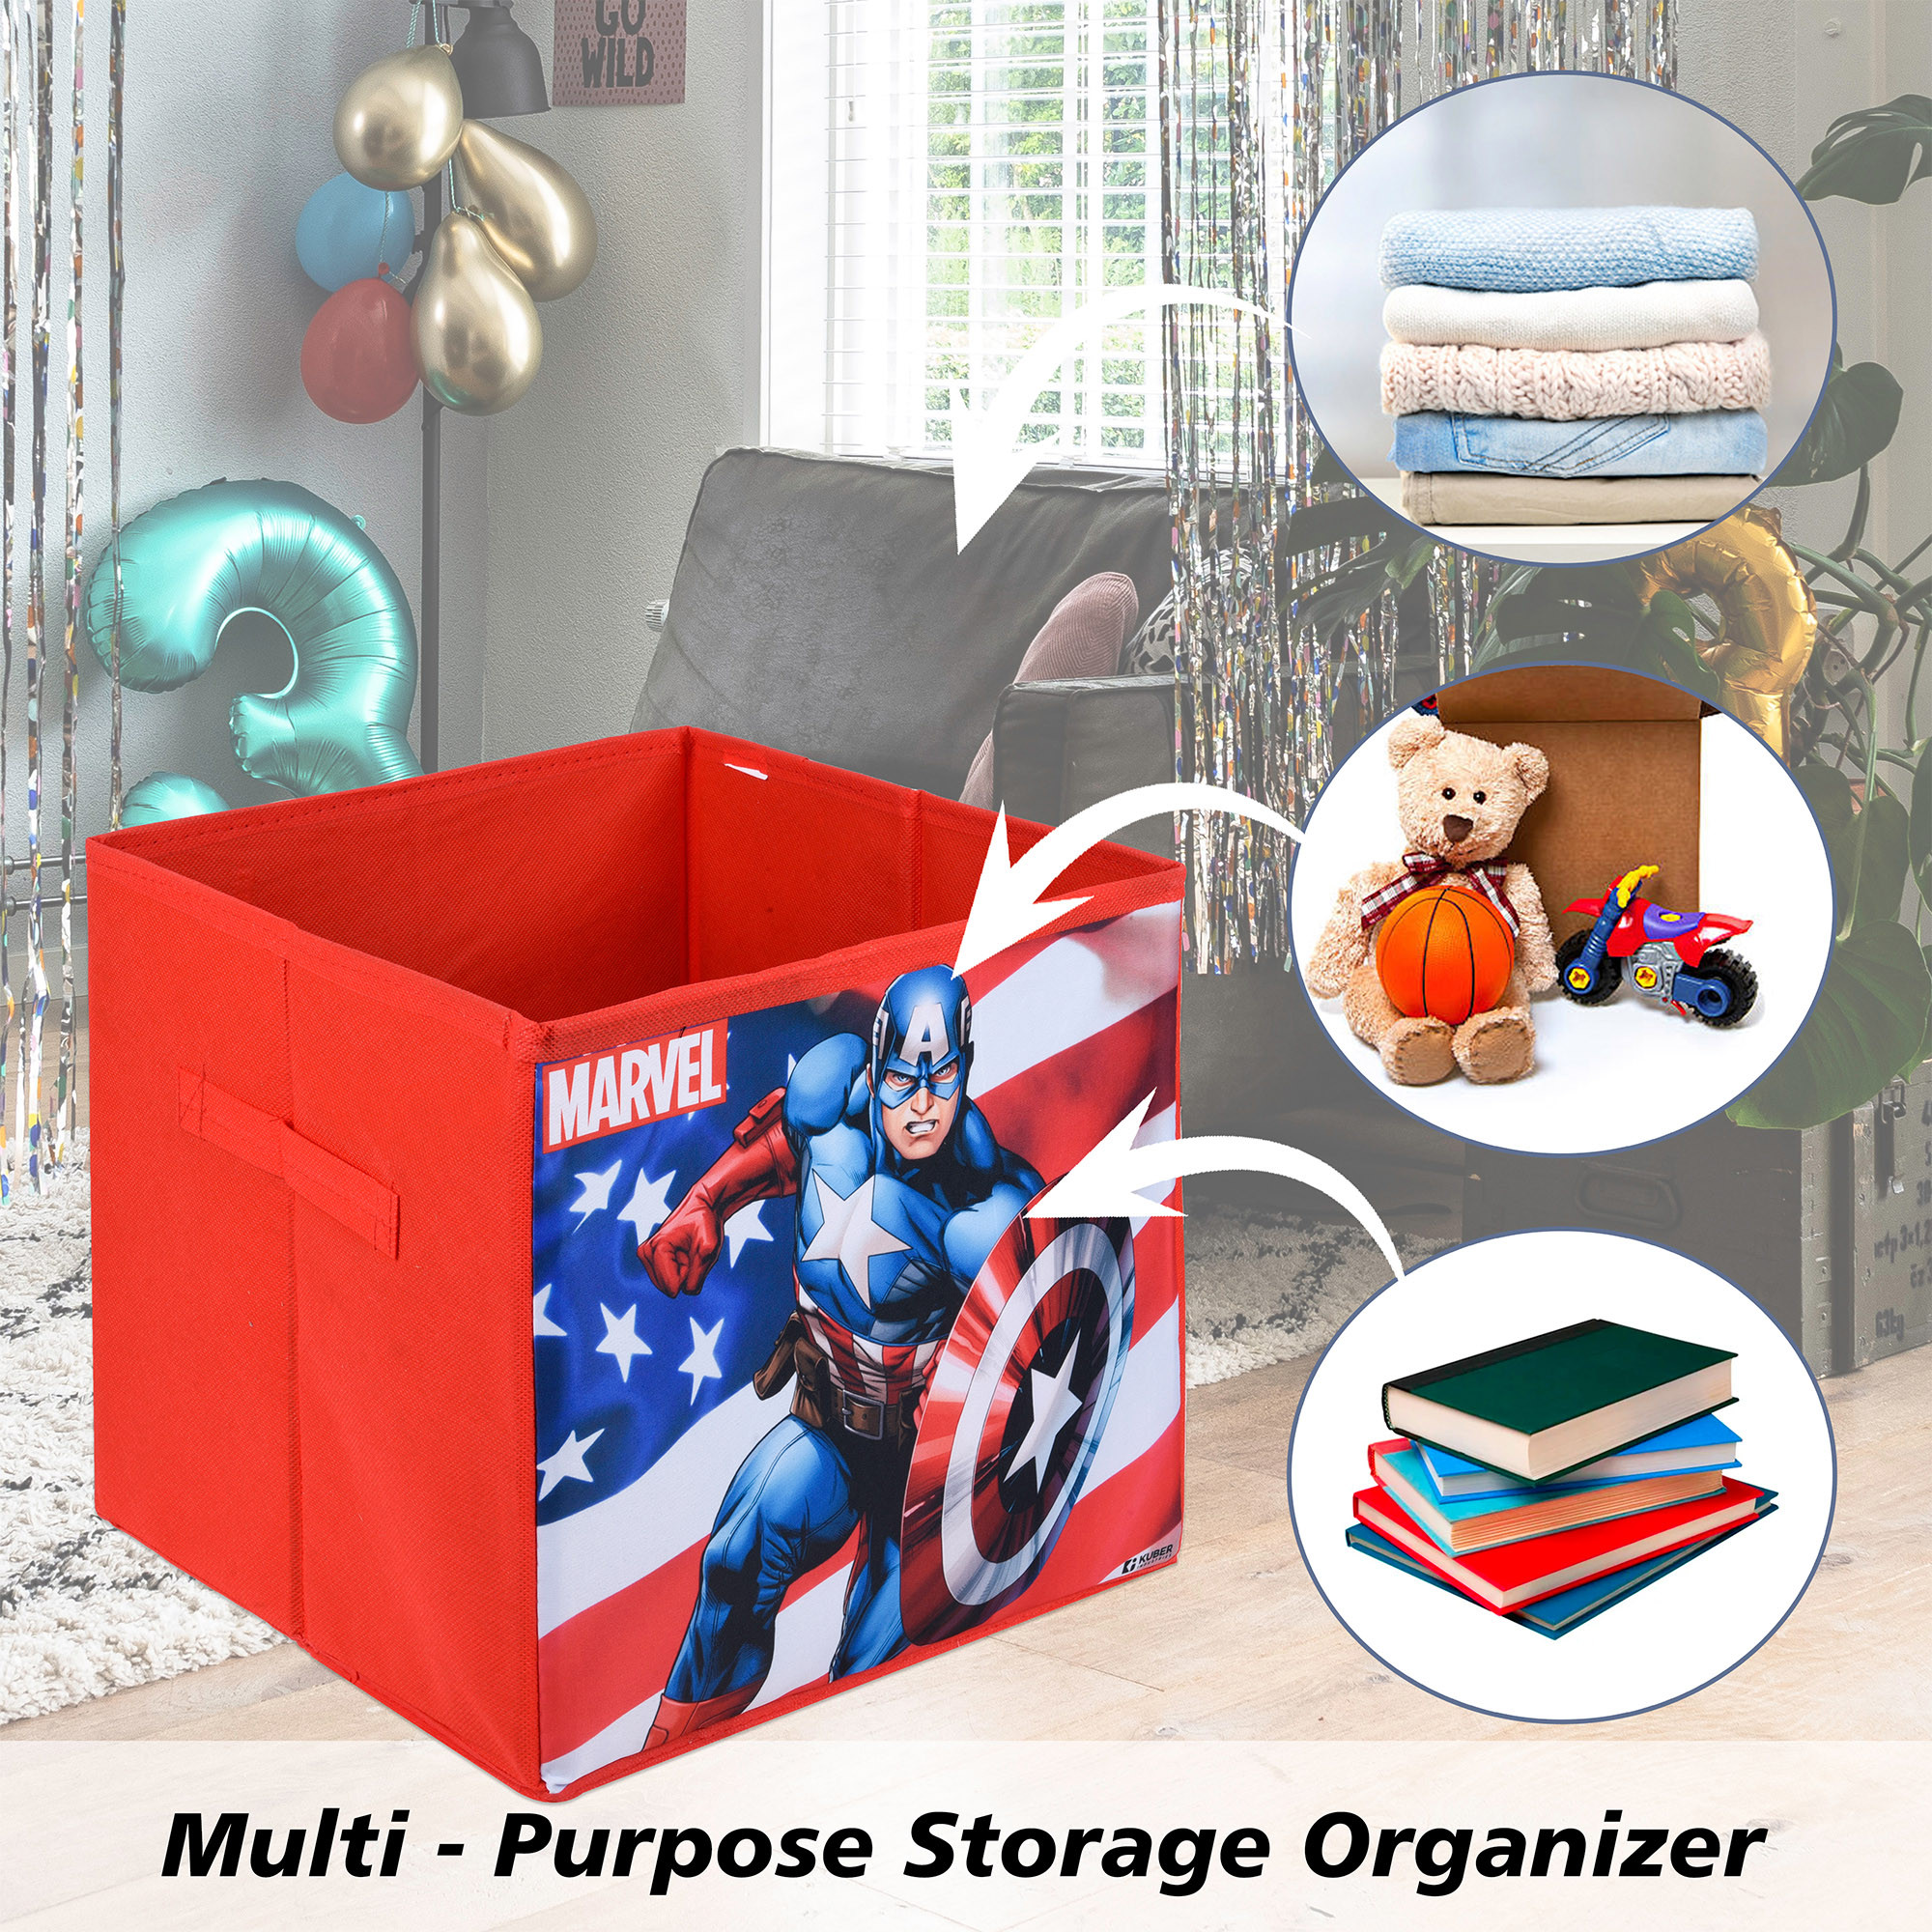 Kuber Industries Storage Box | Square Toy Storage Box | Wardrobe Organizer for Clothes-Books-Toys-Stationary | Drawer Organizer Box with Handle | Marvel-Print | Red & Navy Blue